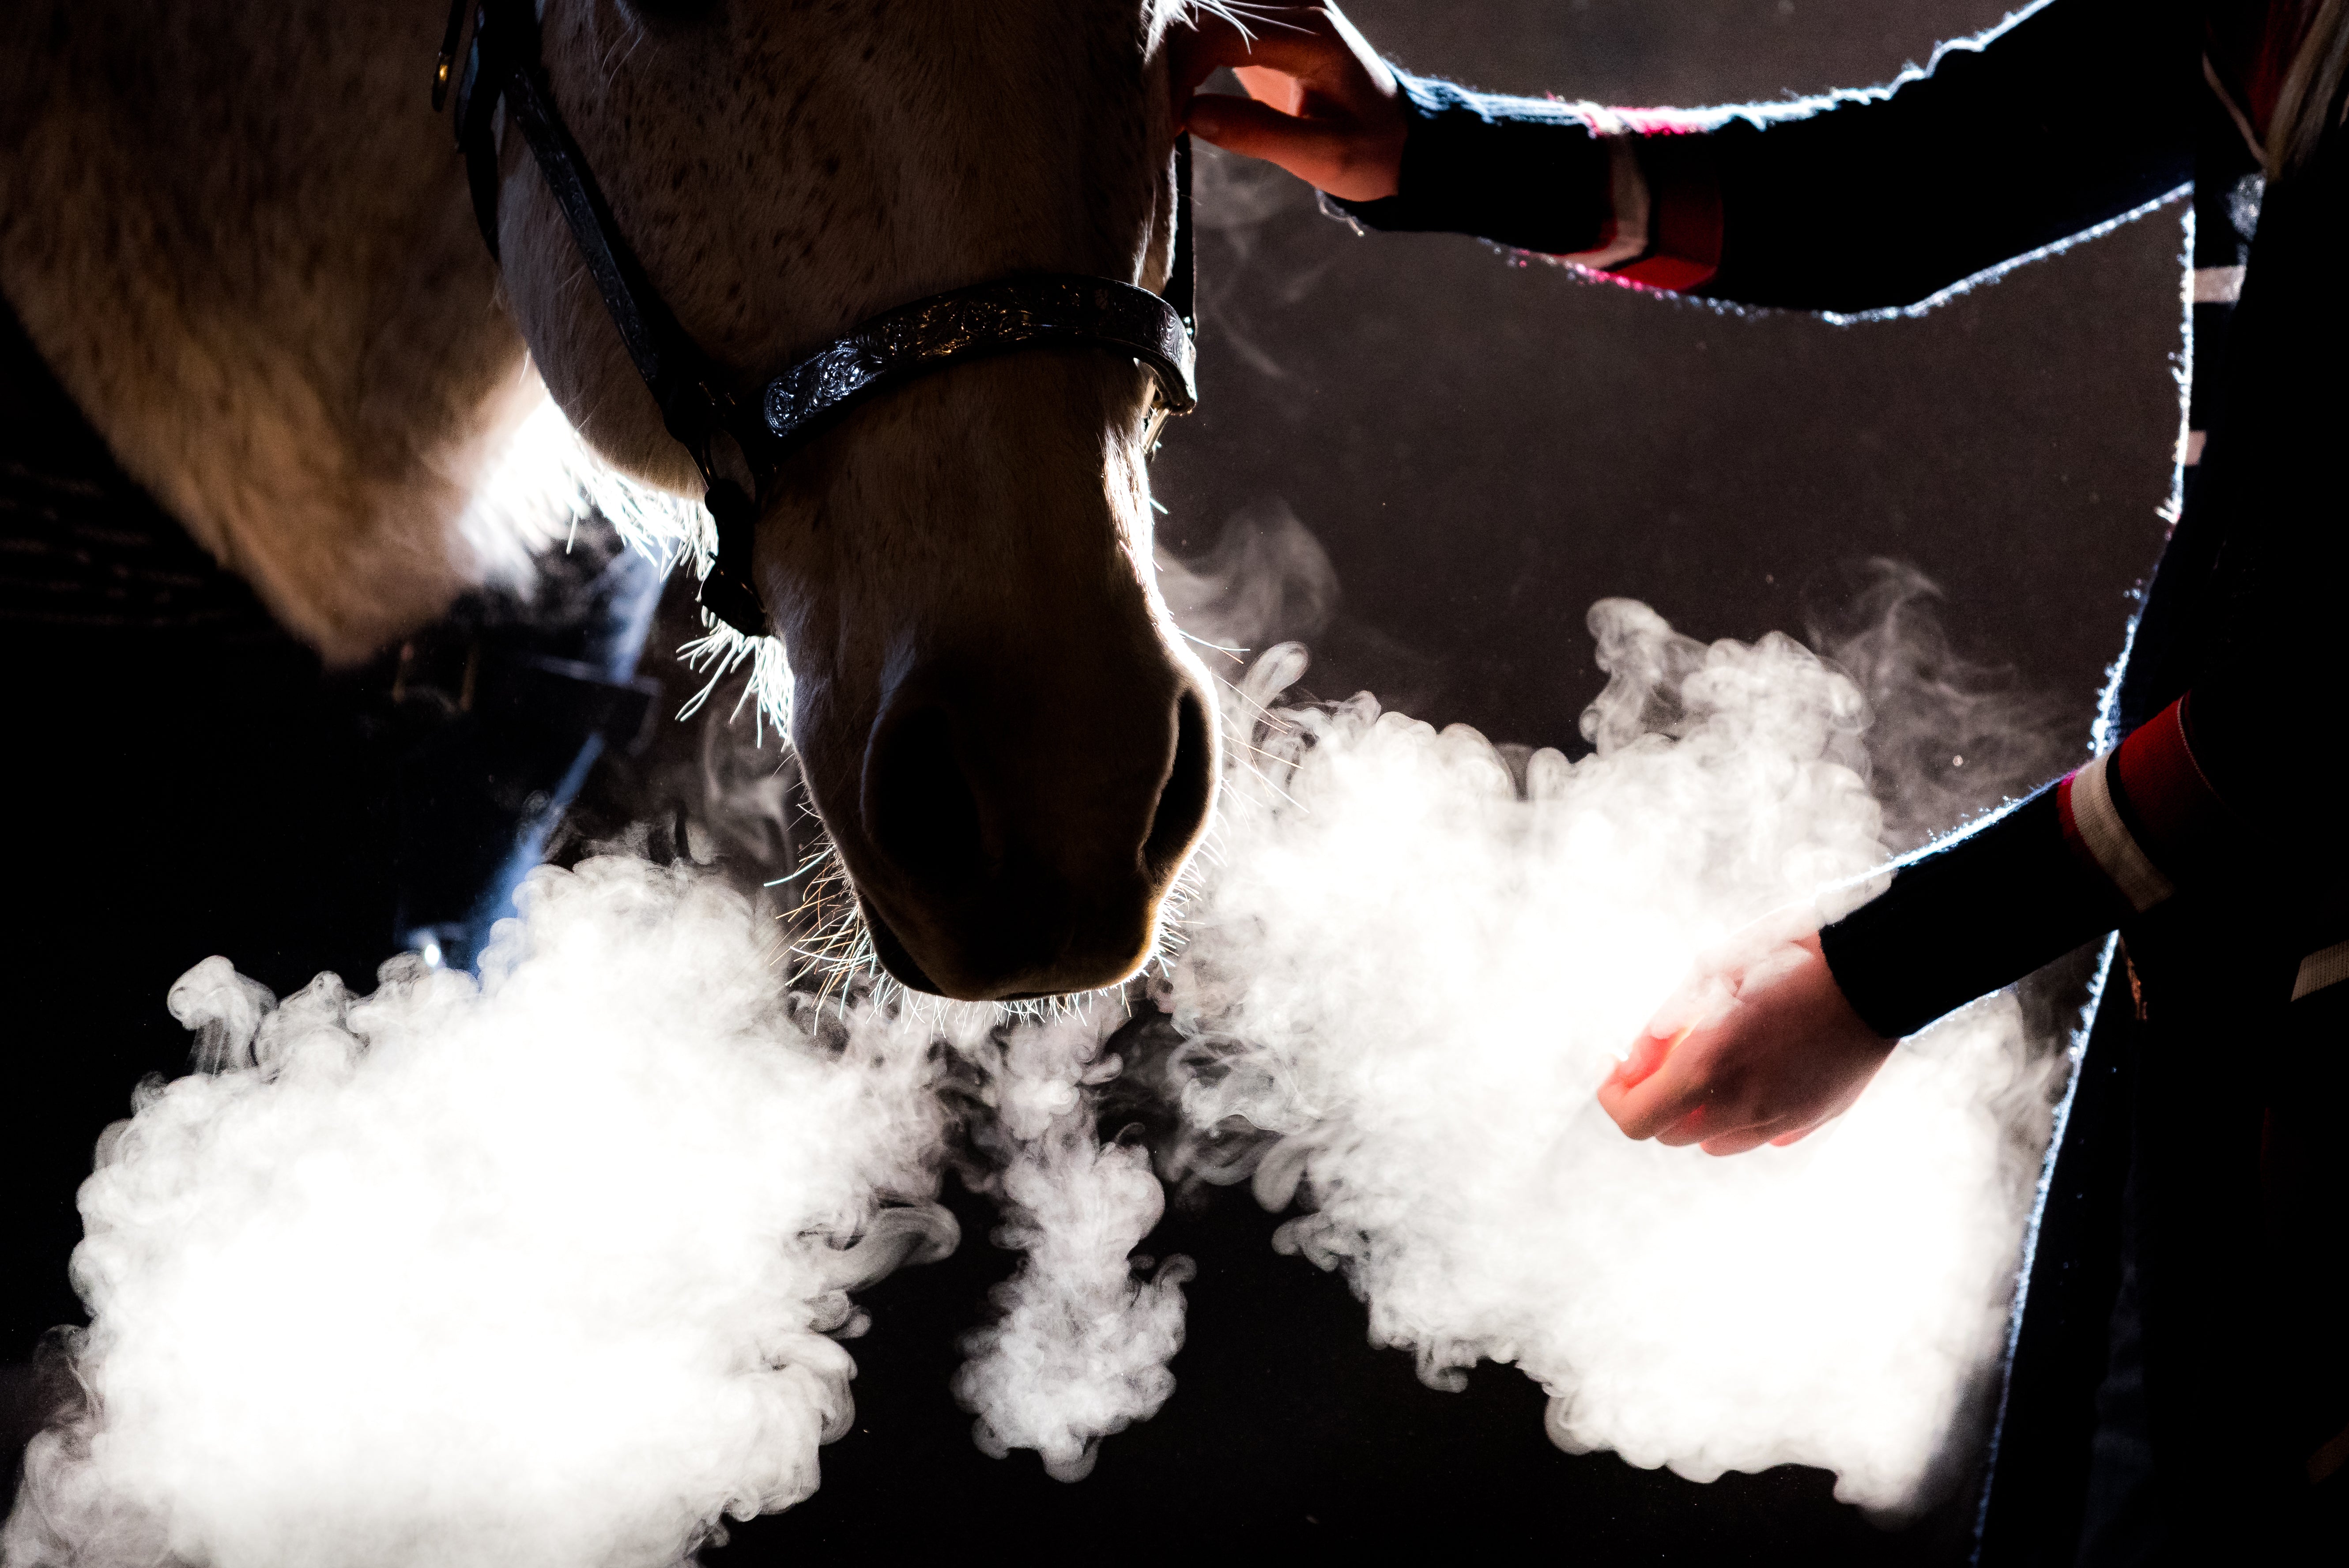 Strategies to Keep Your Horse Breathing Well This Winter